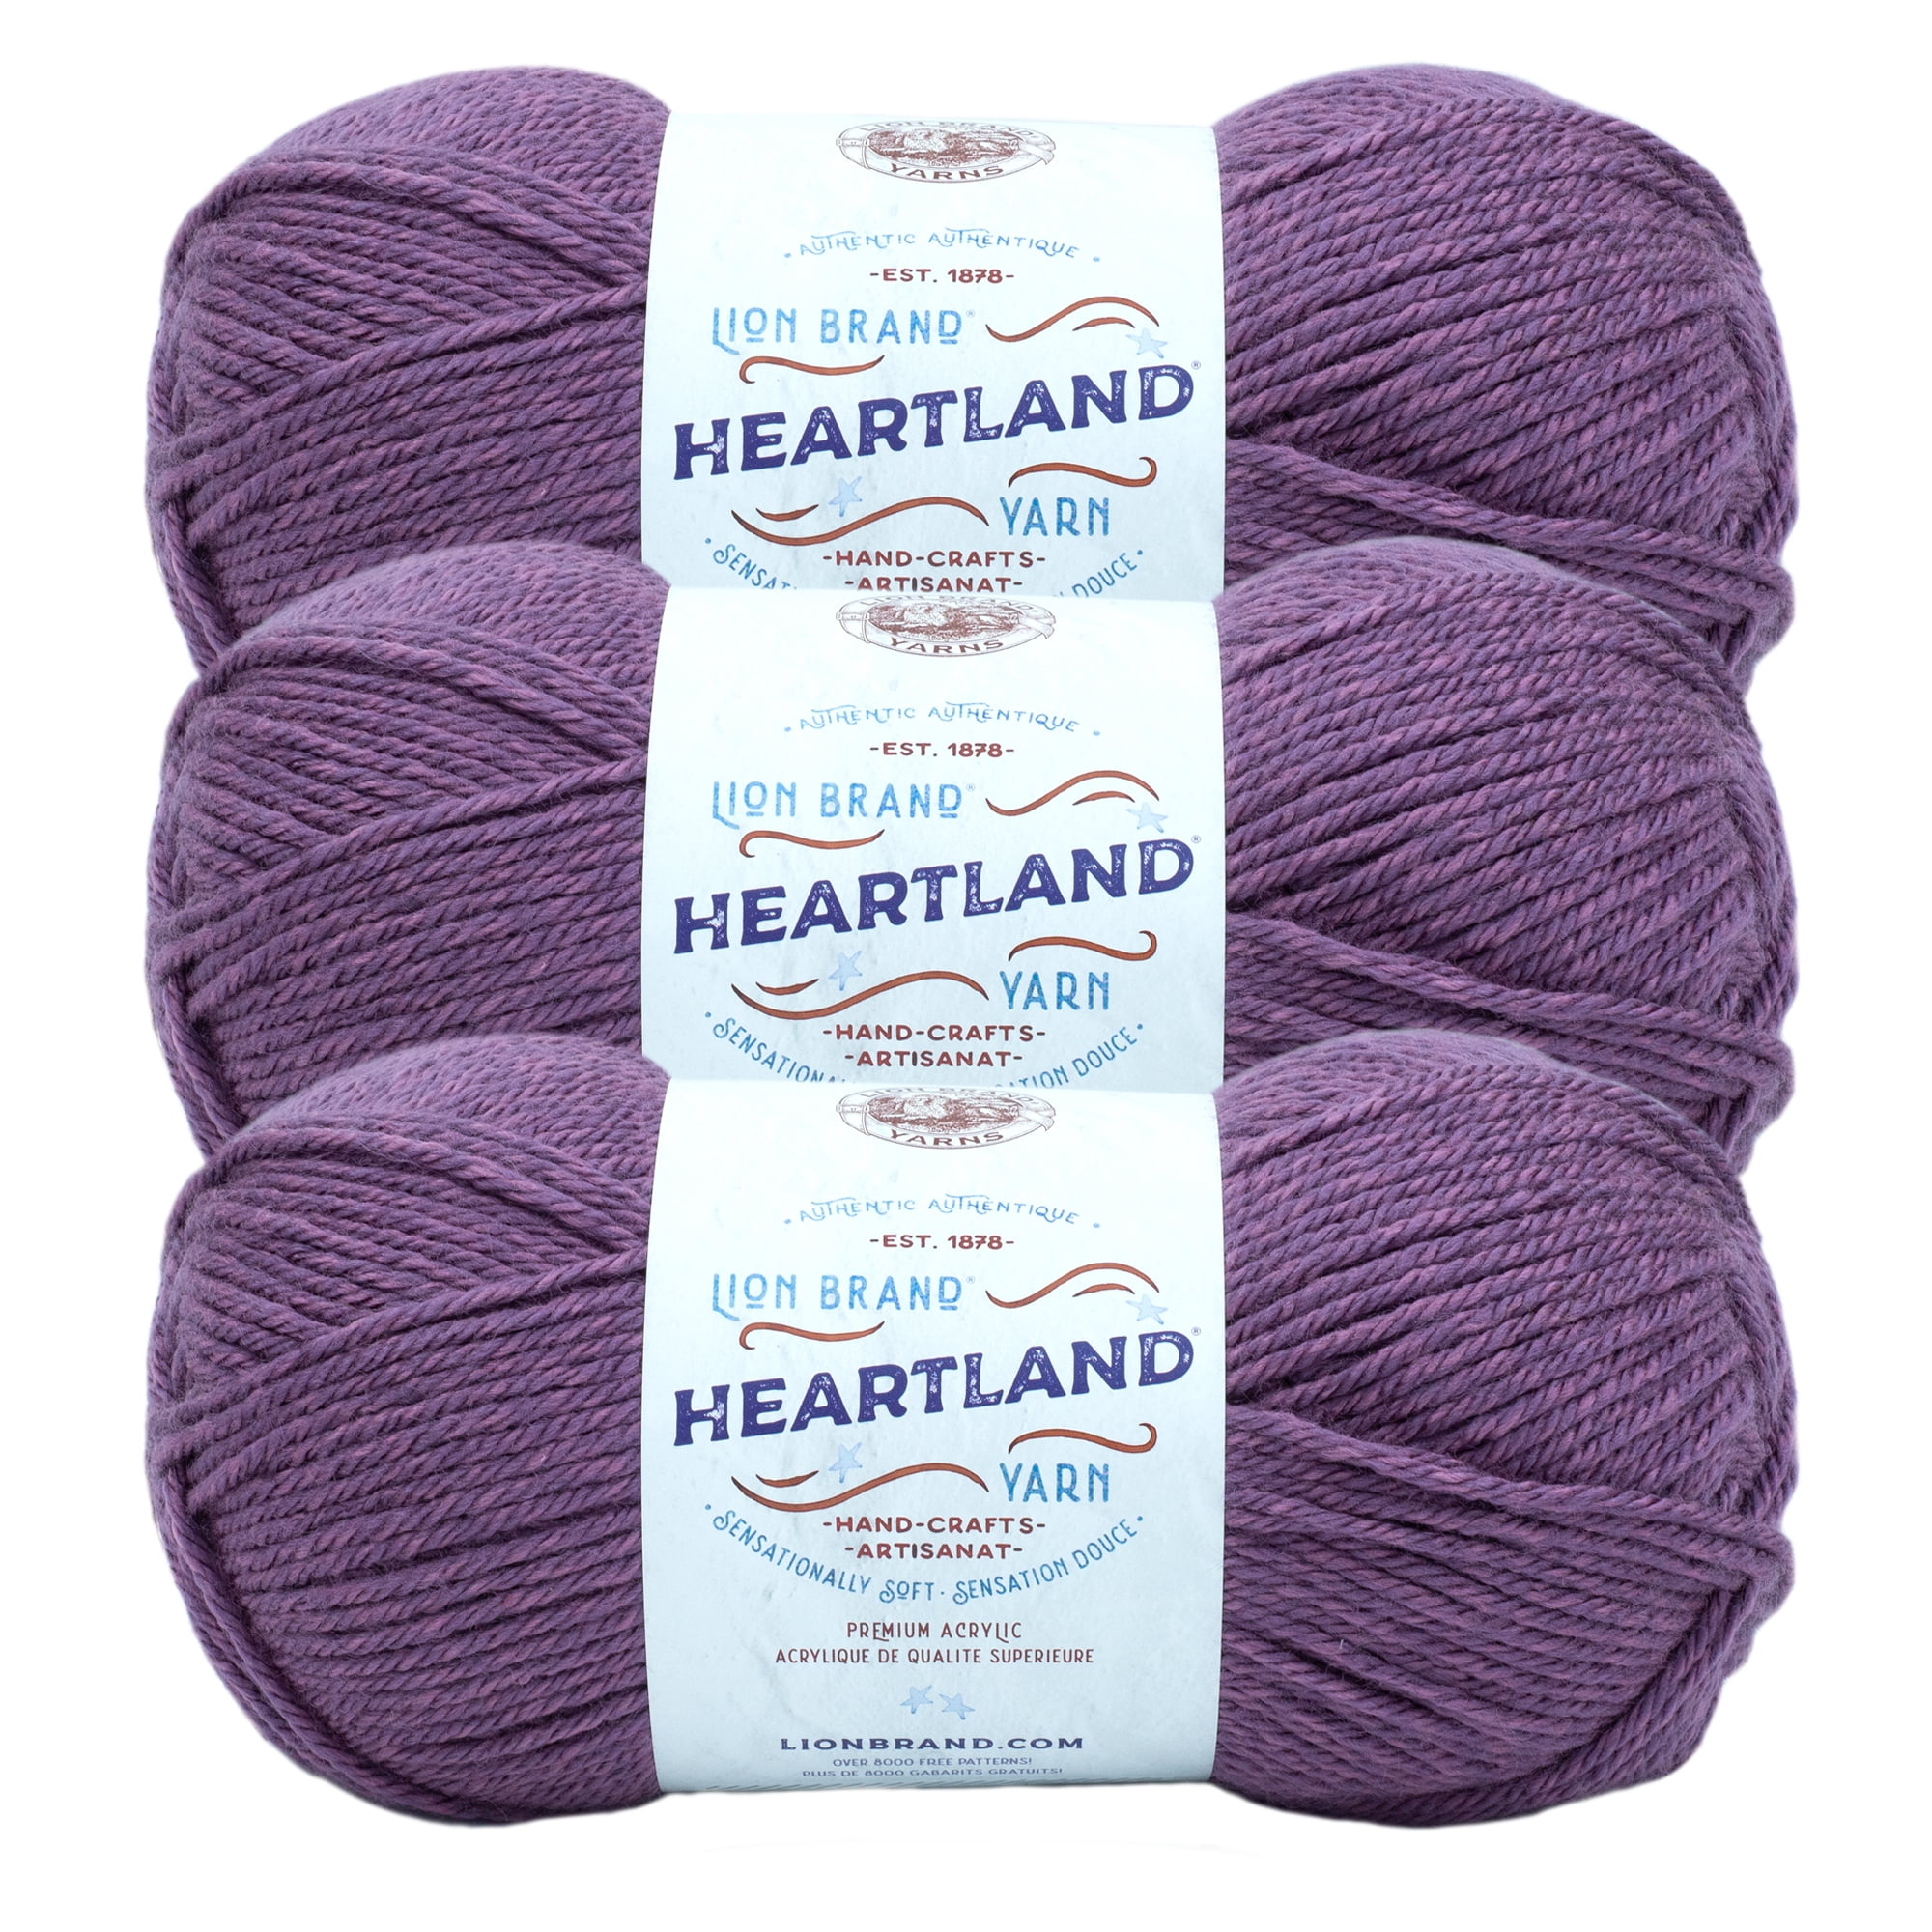 Lion Brand Hometown Yarn Bundle, Palm Bay Orchid, Case of 60